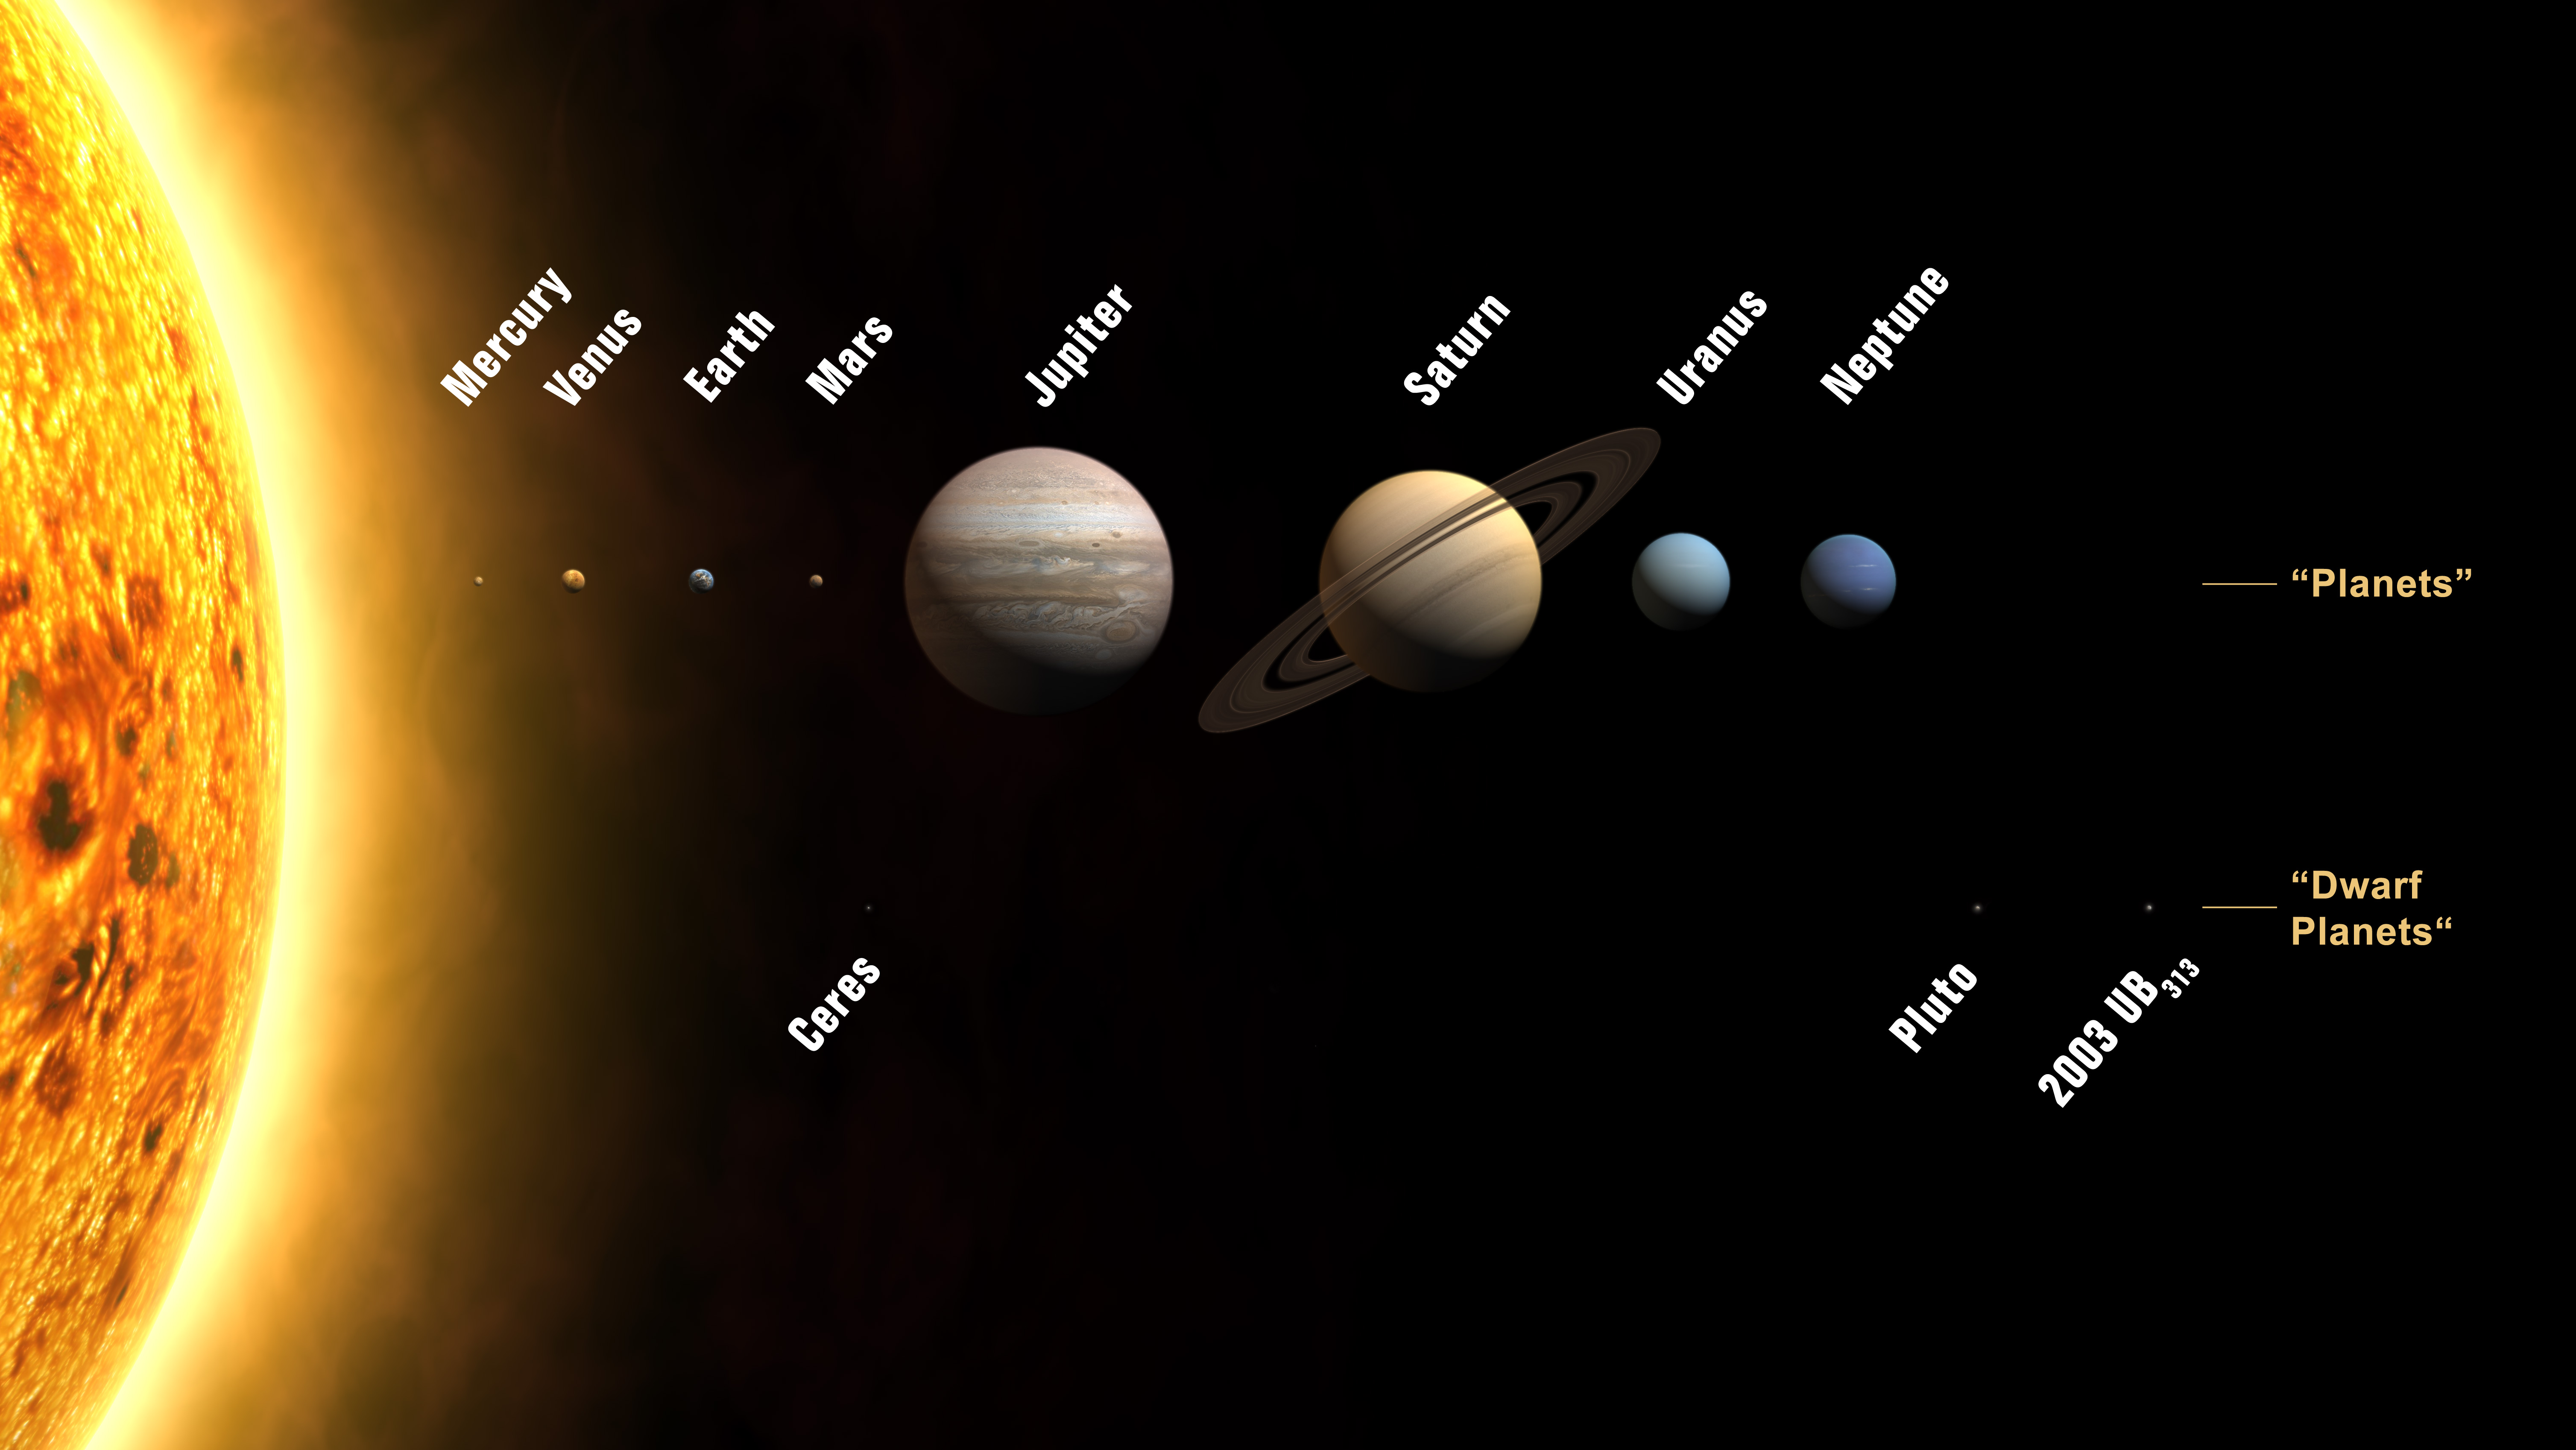 astronomers-have-been-predicting-new-planets-in-our-solar-system-for